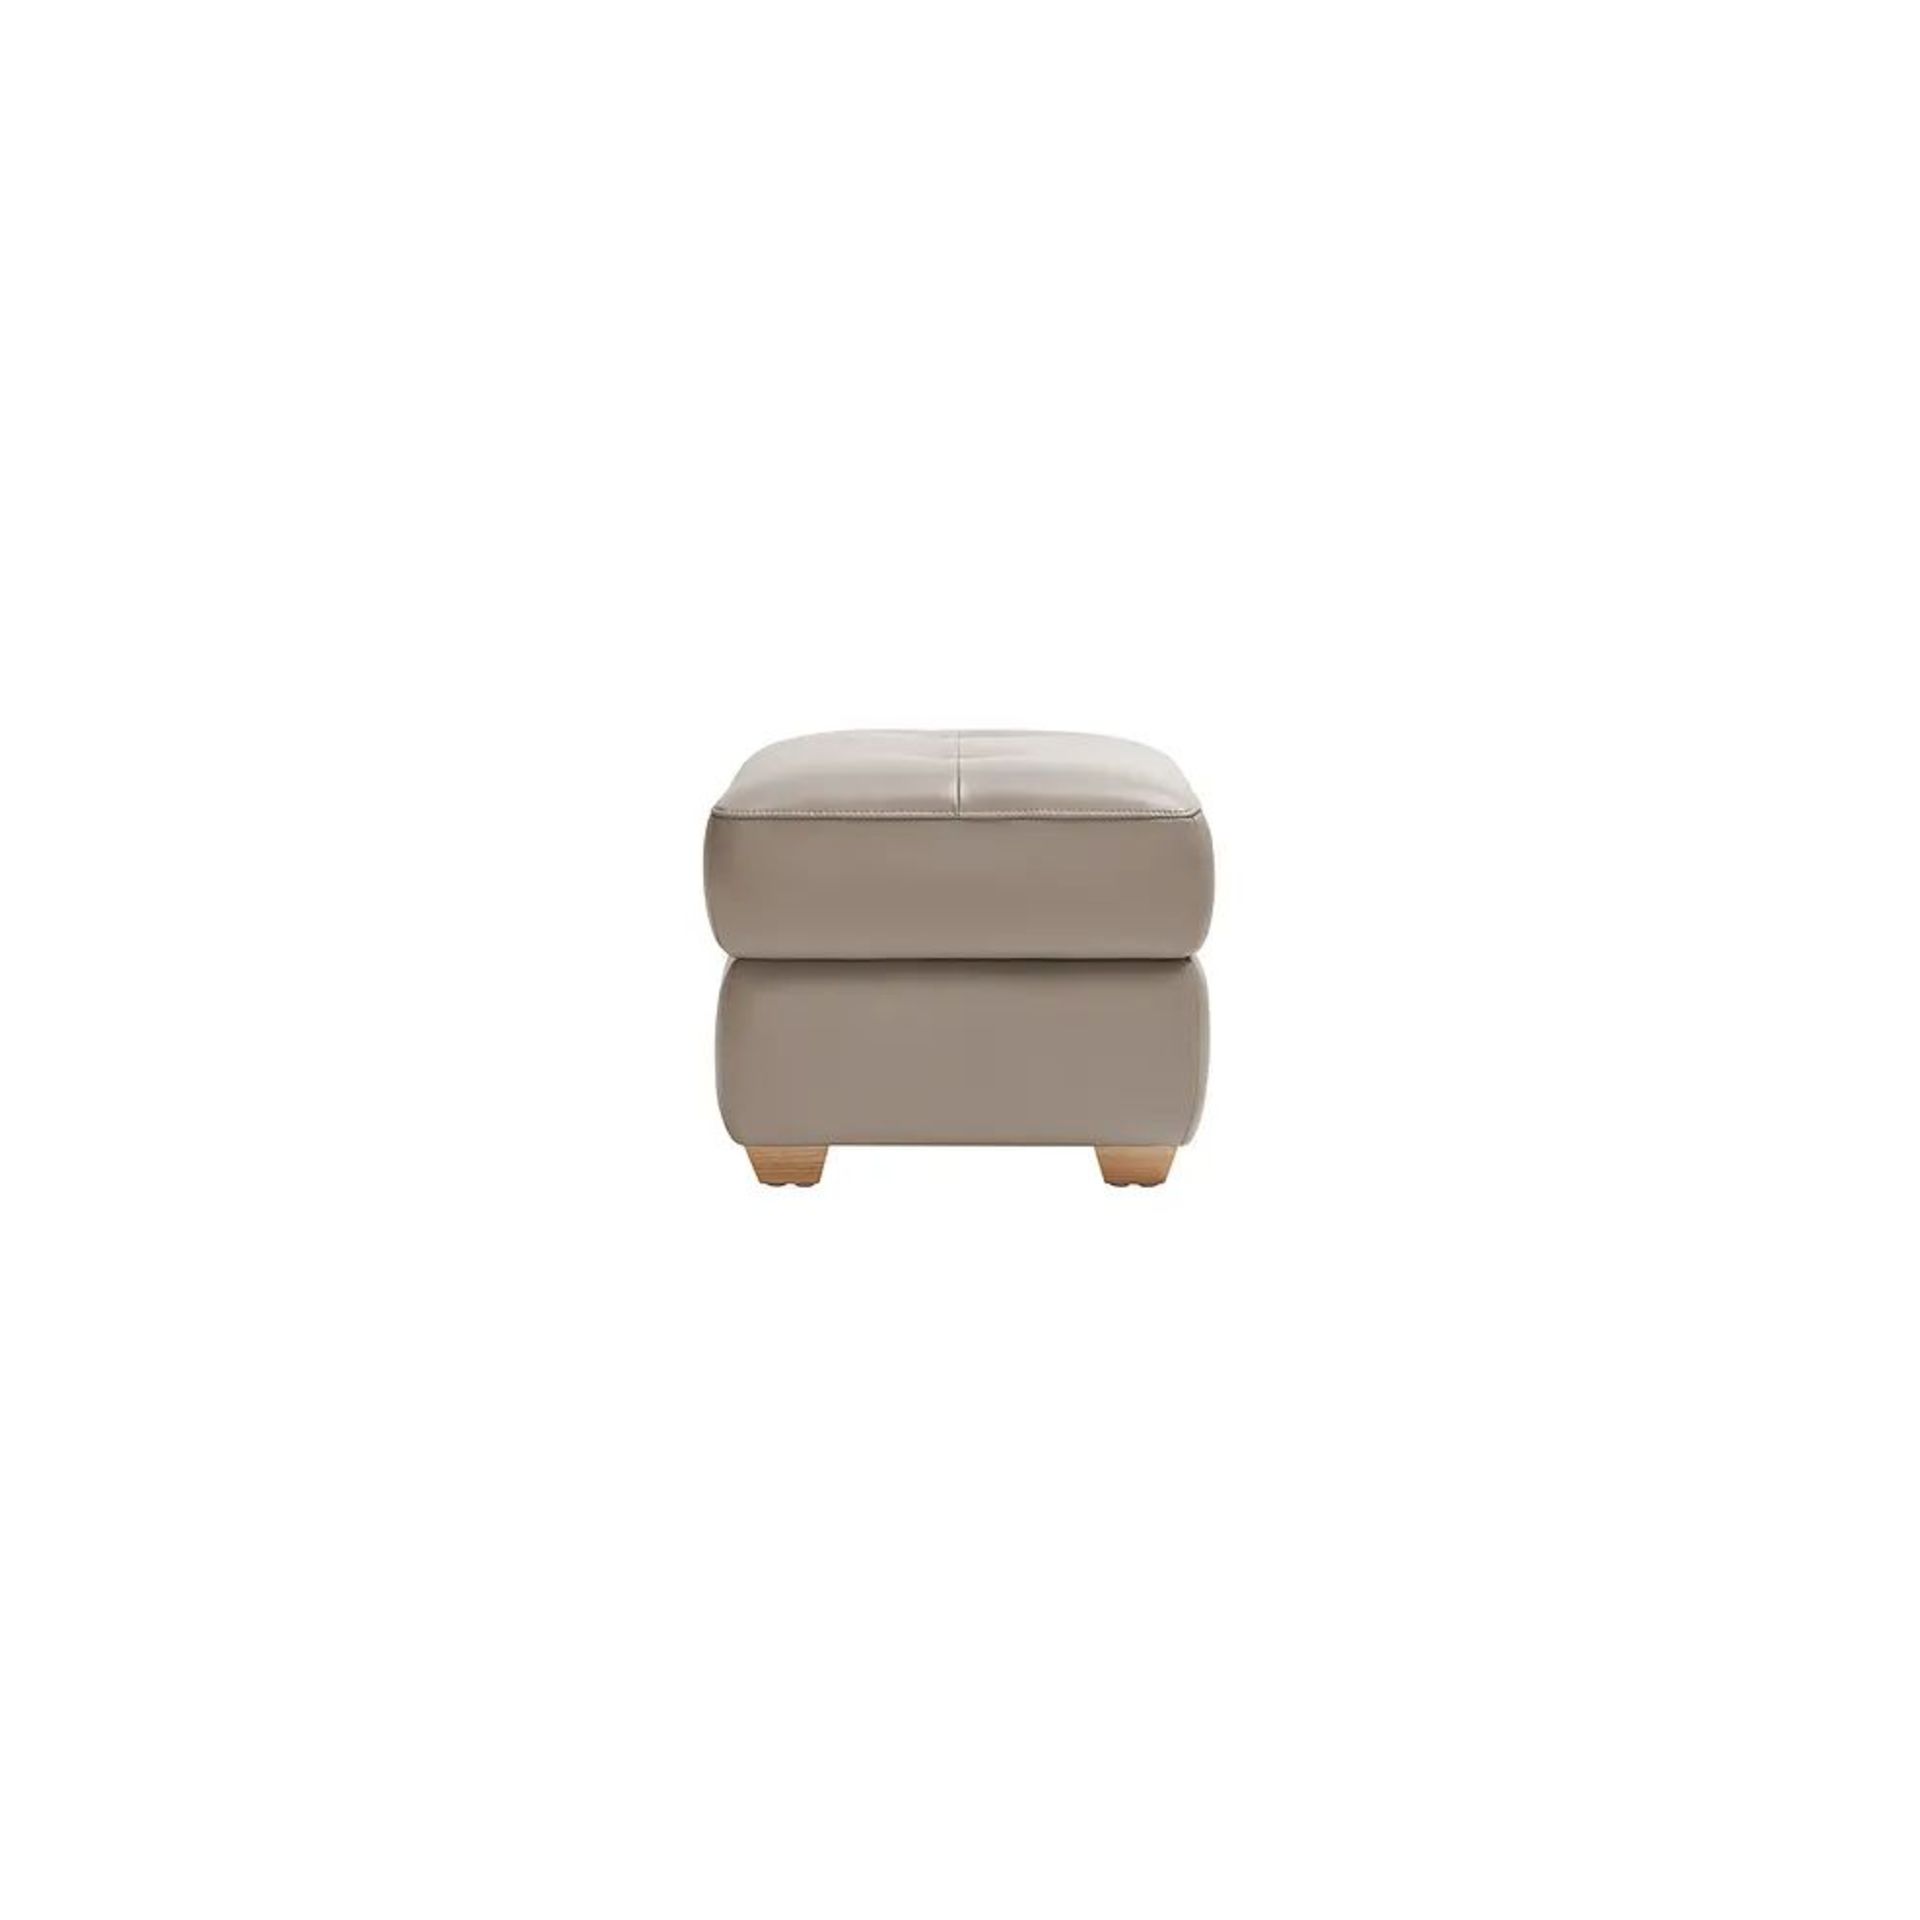 BRAND NEW SAMSON Storage Footstool - STONE LEATHER. RRP £349. Characterised by a simple cuboid - Image 4 of 7